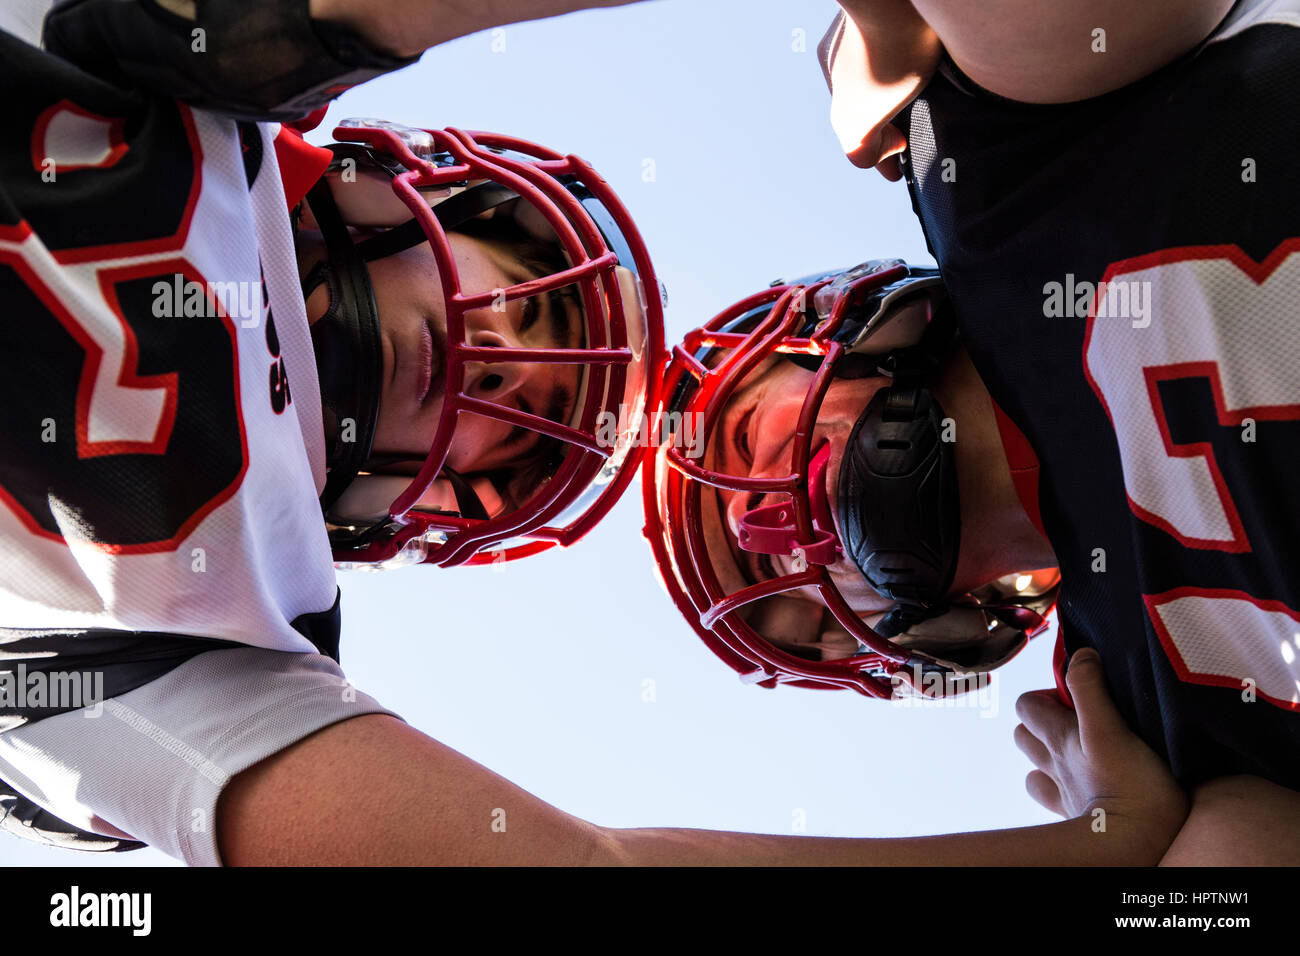 American football players face to face during a match Stock Photo